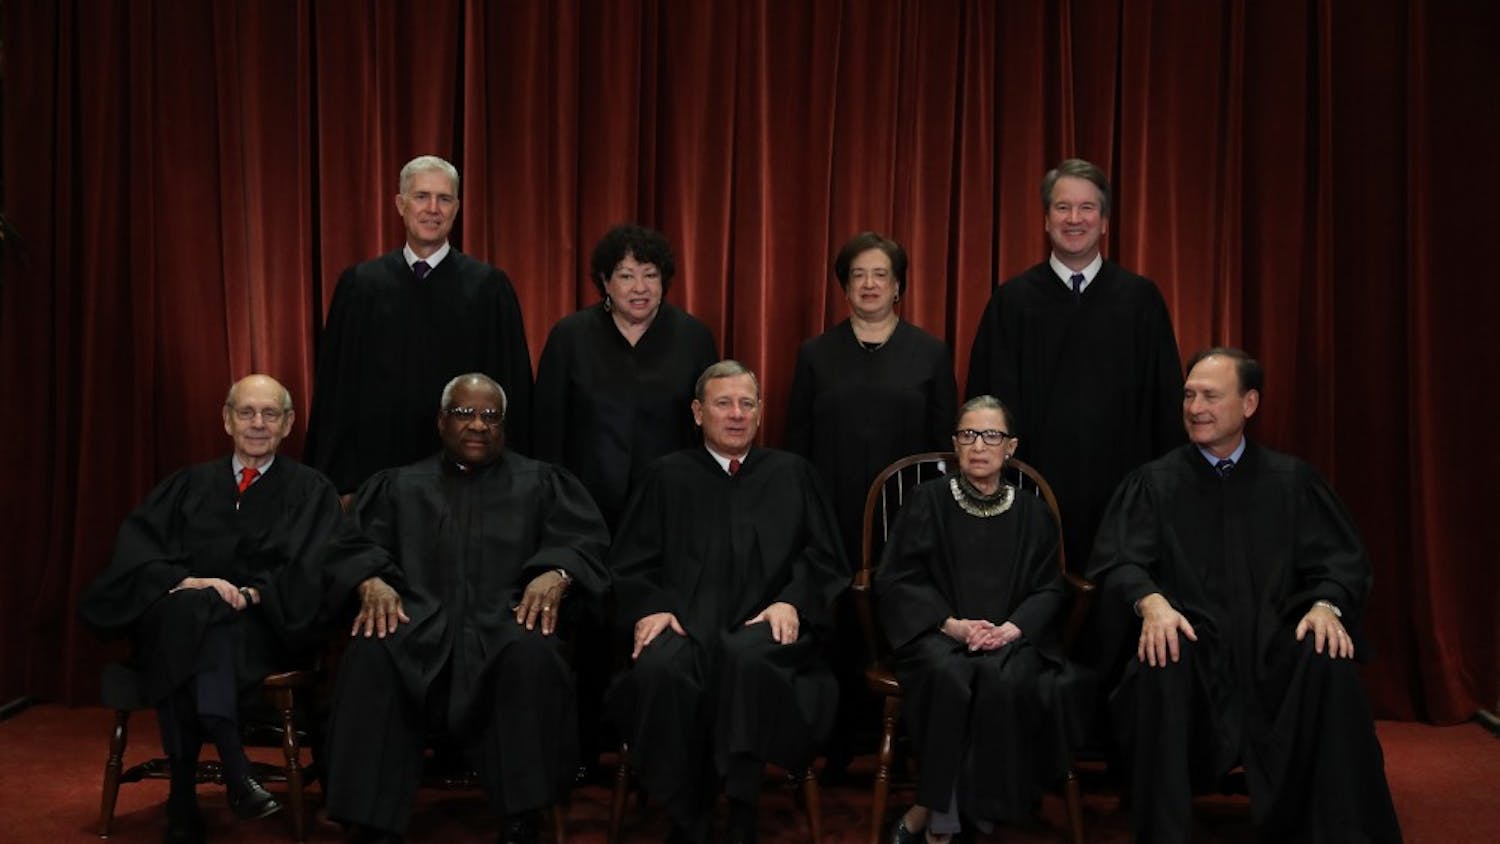 United States Supreme Court (Front L-R) Associate Justice Stephen Breyer, Associate Justice Clarence Thomas, Chief Justice John Roberts, Associate Justice Ruth Bader Ginsburg, Associate Justice Samuel Alito, Jr., (Back L-R) Associate Justice Neil Gorsuch, Associate Justice Sonia Sotomayor, Associate Justice Elena Kagan and Associate Justice Brett Kavanaugh pose for their official portrait Nov. 30, 2018, at the in the East Conference Room at the Supreme Court buildin in Washington, D.C. 